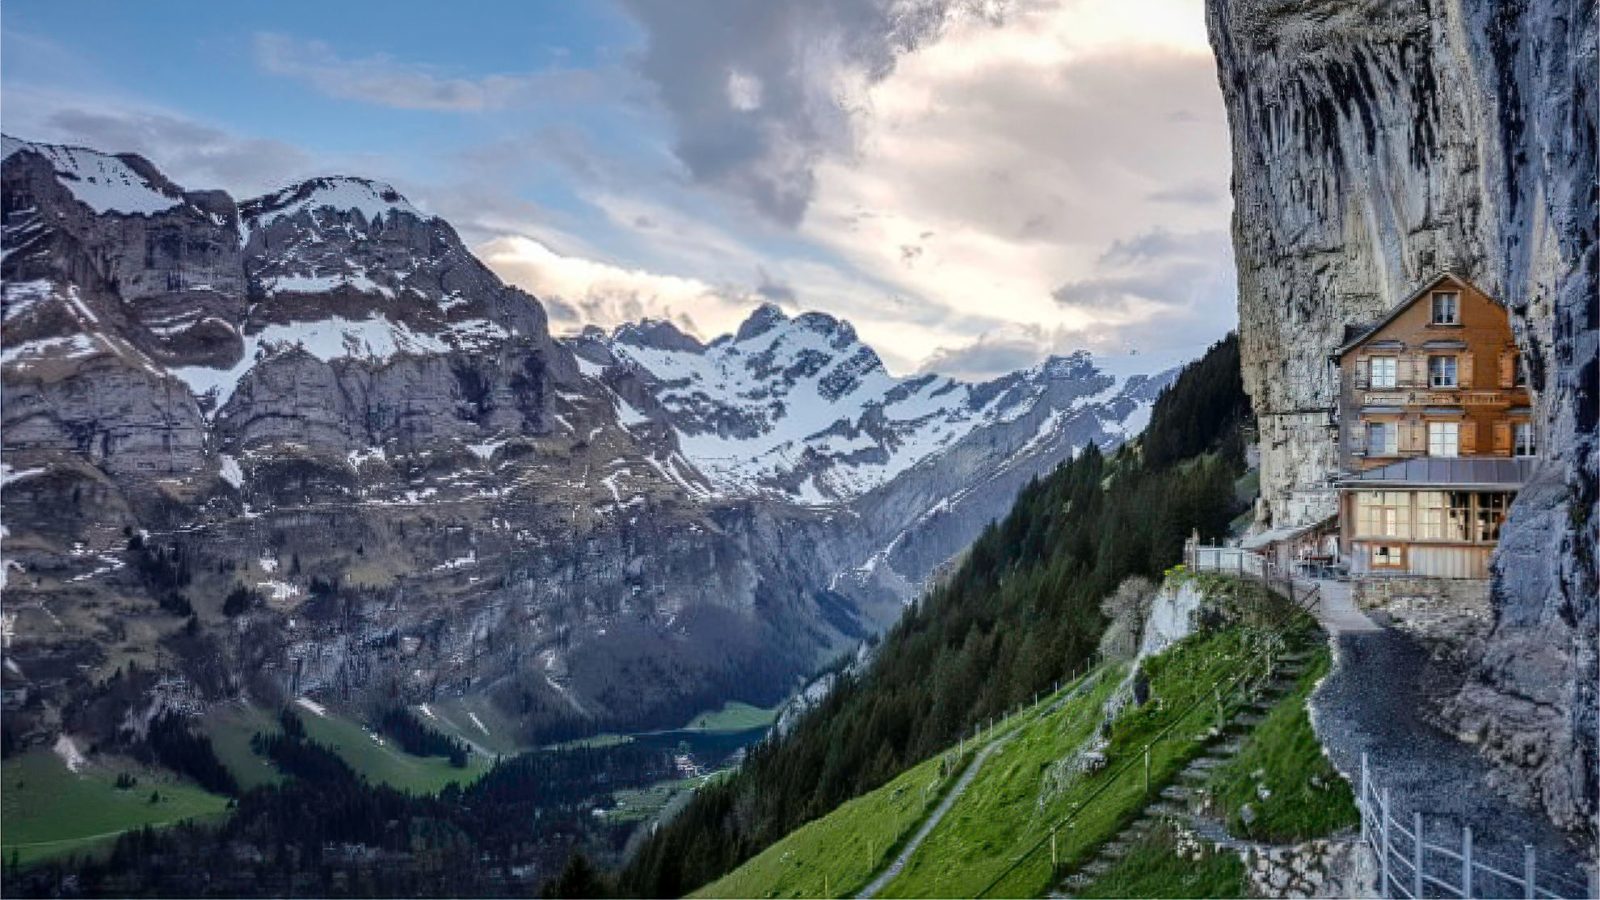 Managers iconic Swiss cliff face restaurant want to ban 'annoying' drones